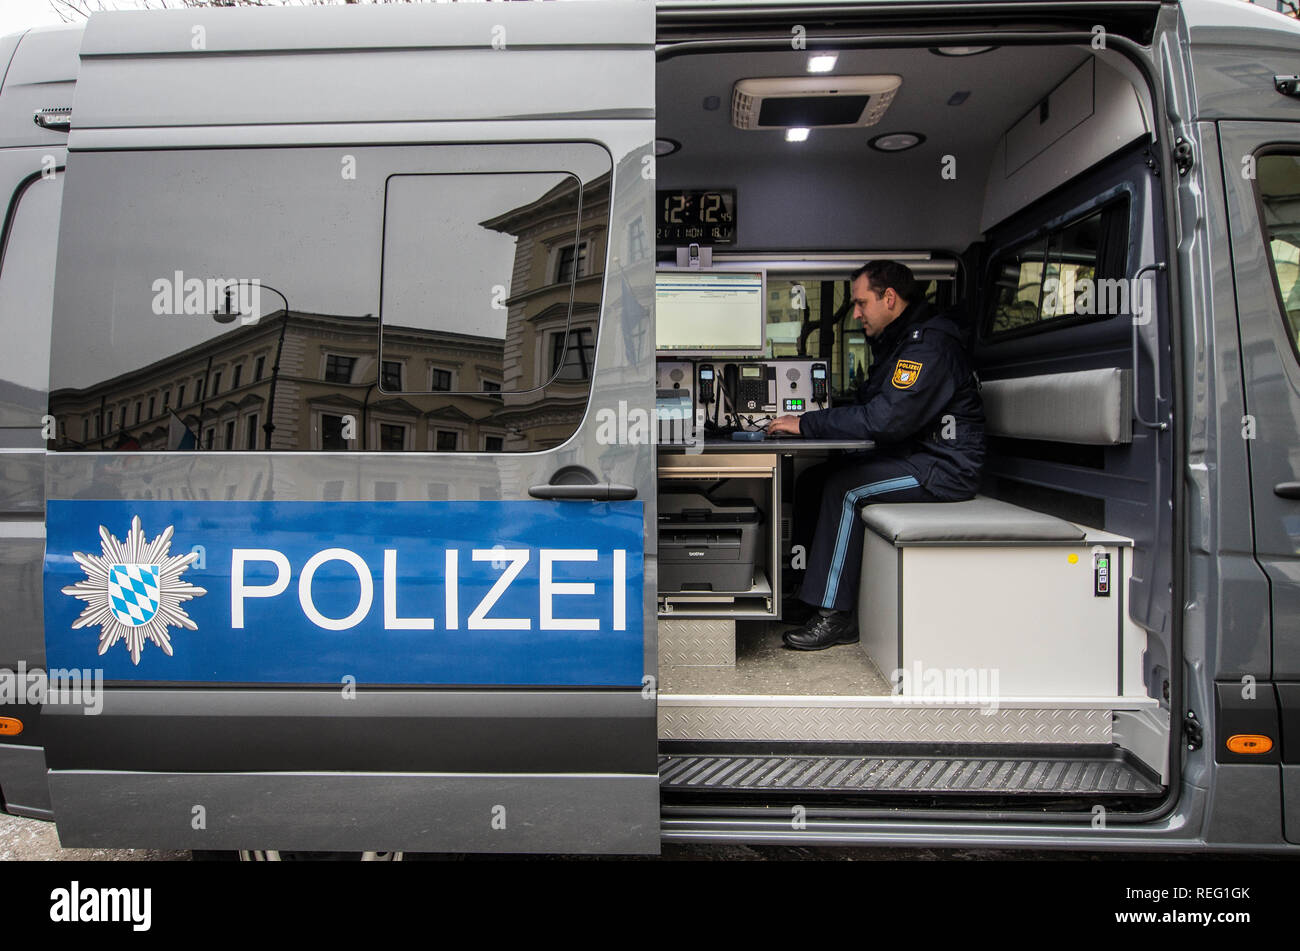 Munich, Bavaria, Germany. 21st Jan, 2019. Inside one of the mobile offices of the Bavarian Border Police, where they display the advanced communications and proofing devices they use to carry out their tasks. The Bavarian Innenminister Joachim Herrmann and the Direktor der Bayerischen Grenzpolizei Alois Mannichl presented the half year statistics of the controversial border police (Grenzpolizei) that operates at the border crossings between Germany and Austria. Herrmann announced plans to double the border protection police by 2023.m Credit: ZUMA Press, Inc./Alamy Live News Stock Photo